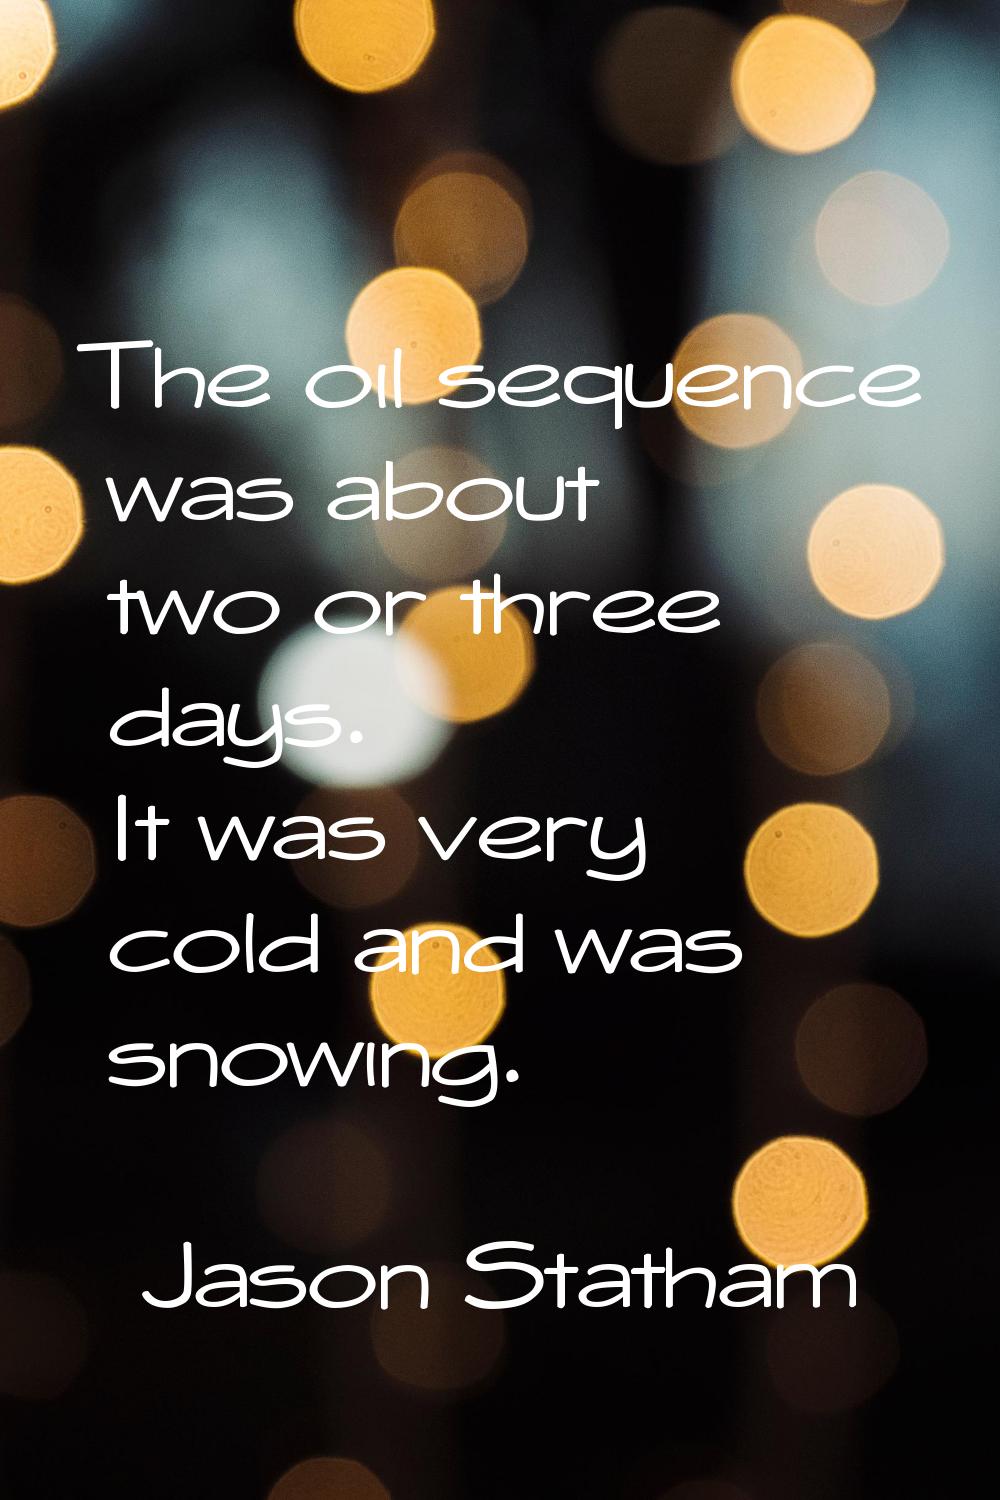 The oil sequence was about two or three days. It was very cold and was snowing.